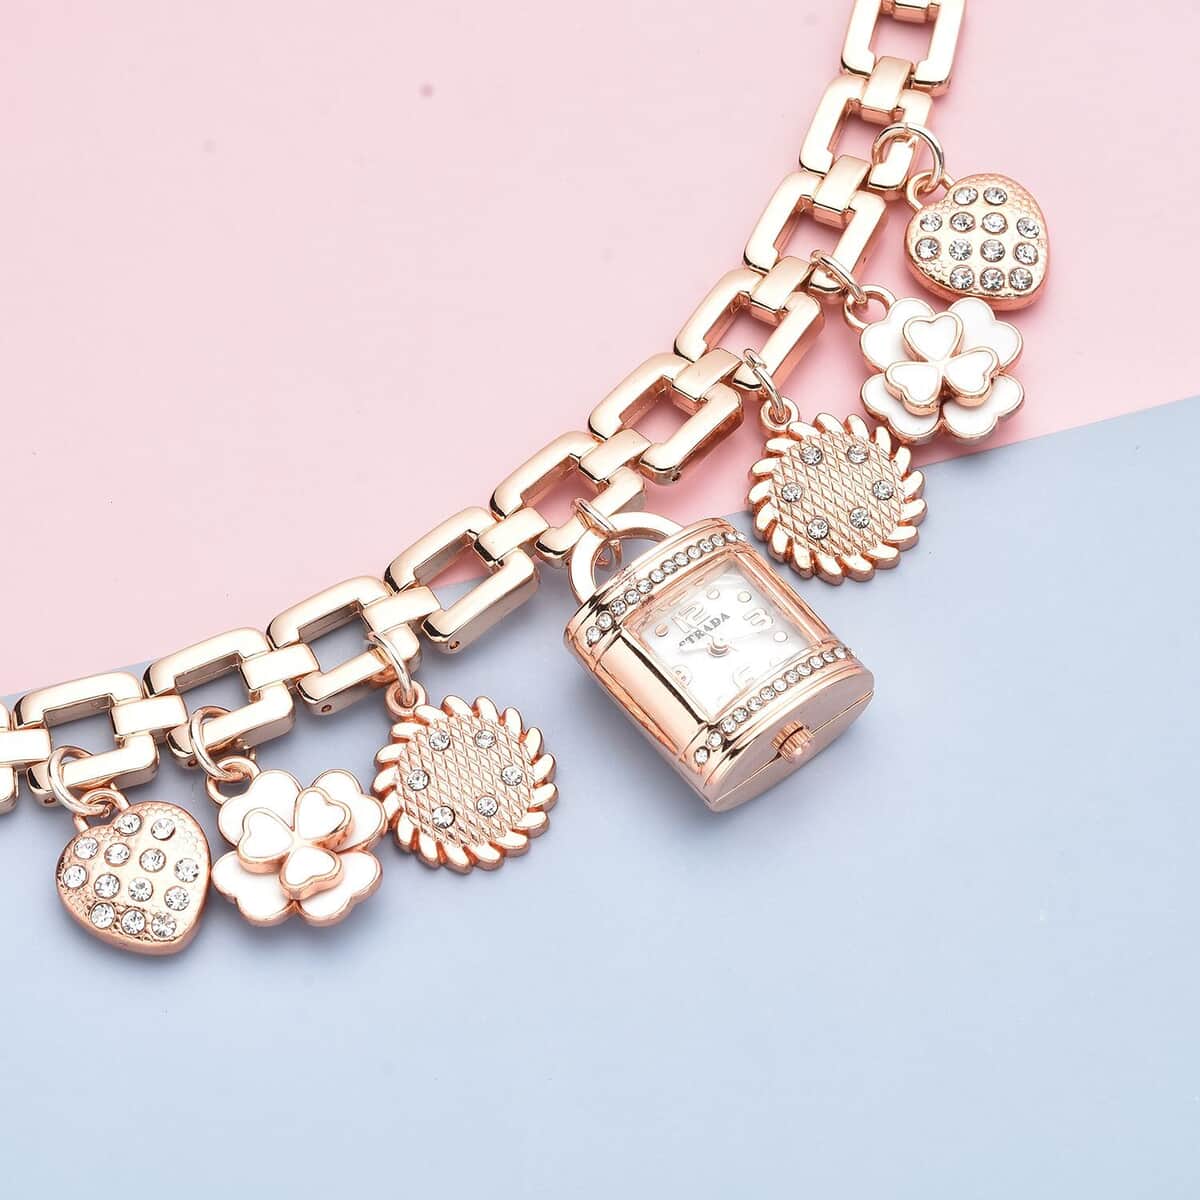 Strada Austrian Crystal and Enameled Japanese Movement Multi Charm Bracelet Watch (7.50 in) in Rosetone image number 1